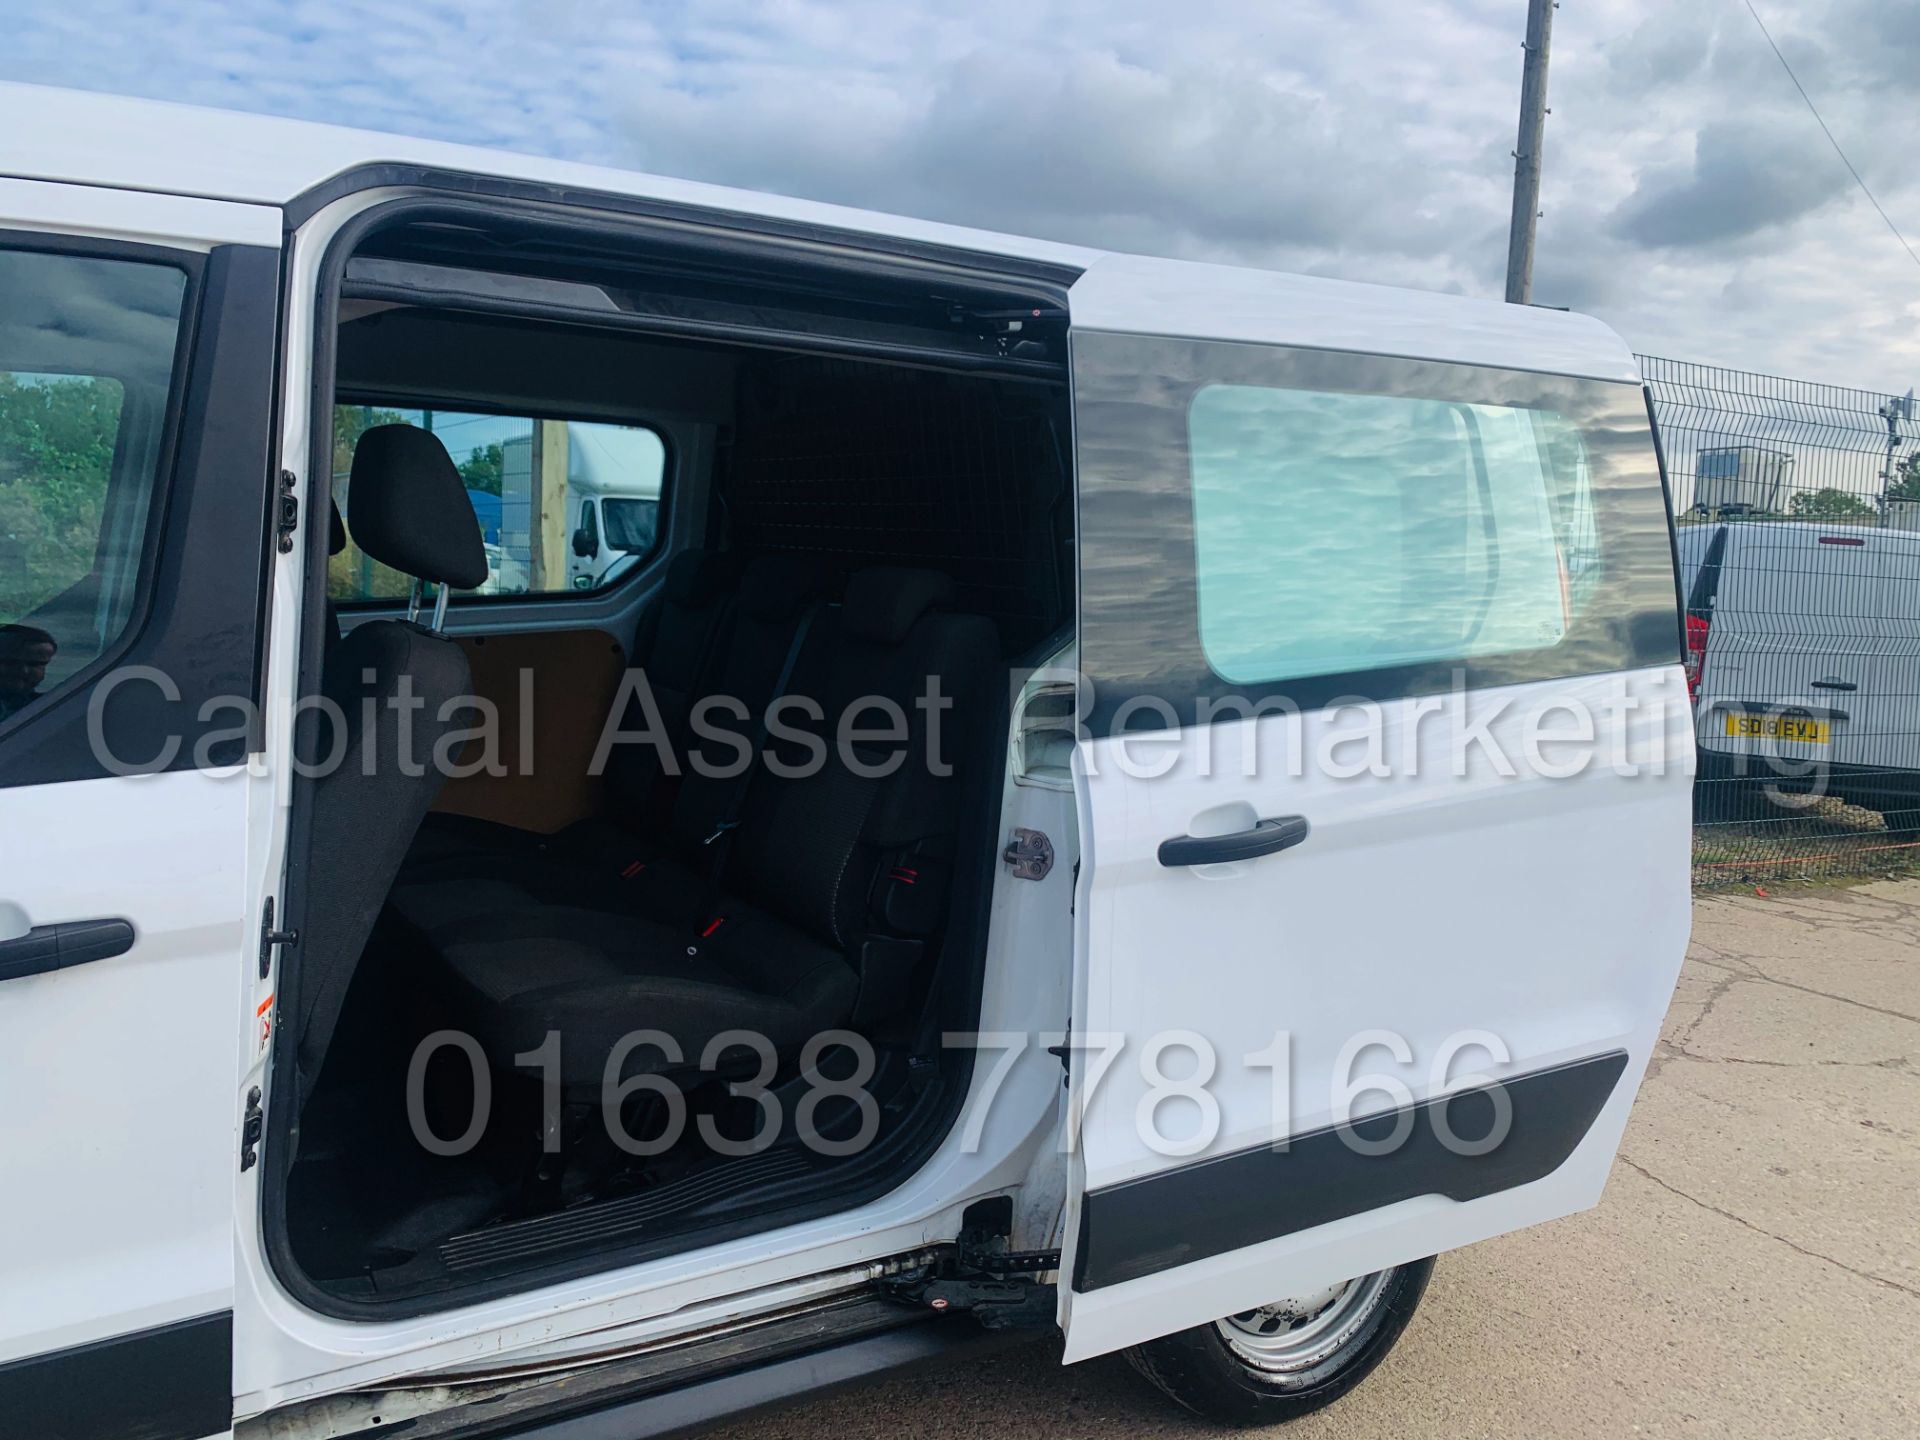 (ON SALE) FORD TRANSIT CONNECT *LWB - 5 SEATER CREW VAN* (2018 - EURO 6) 1.5 TDCI *A/C* (1 OWNER) - Image 21 of 40